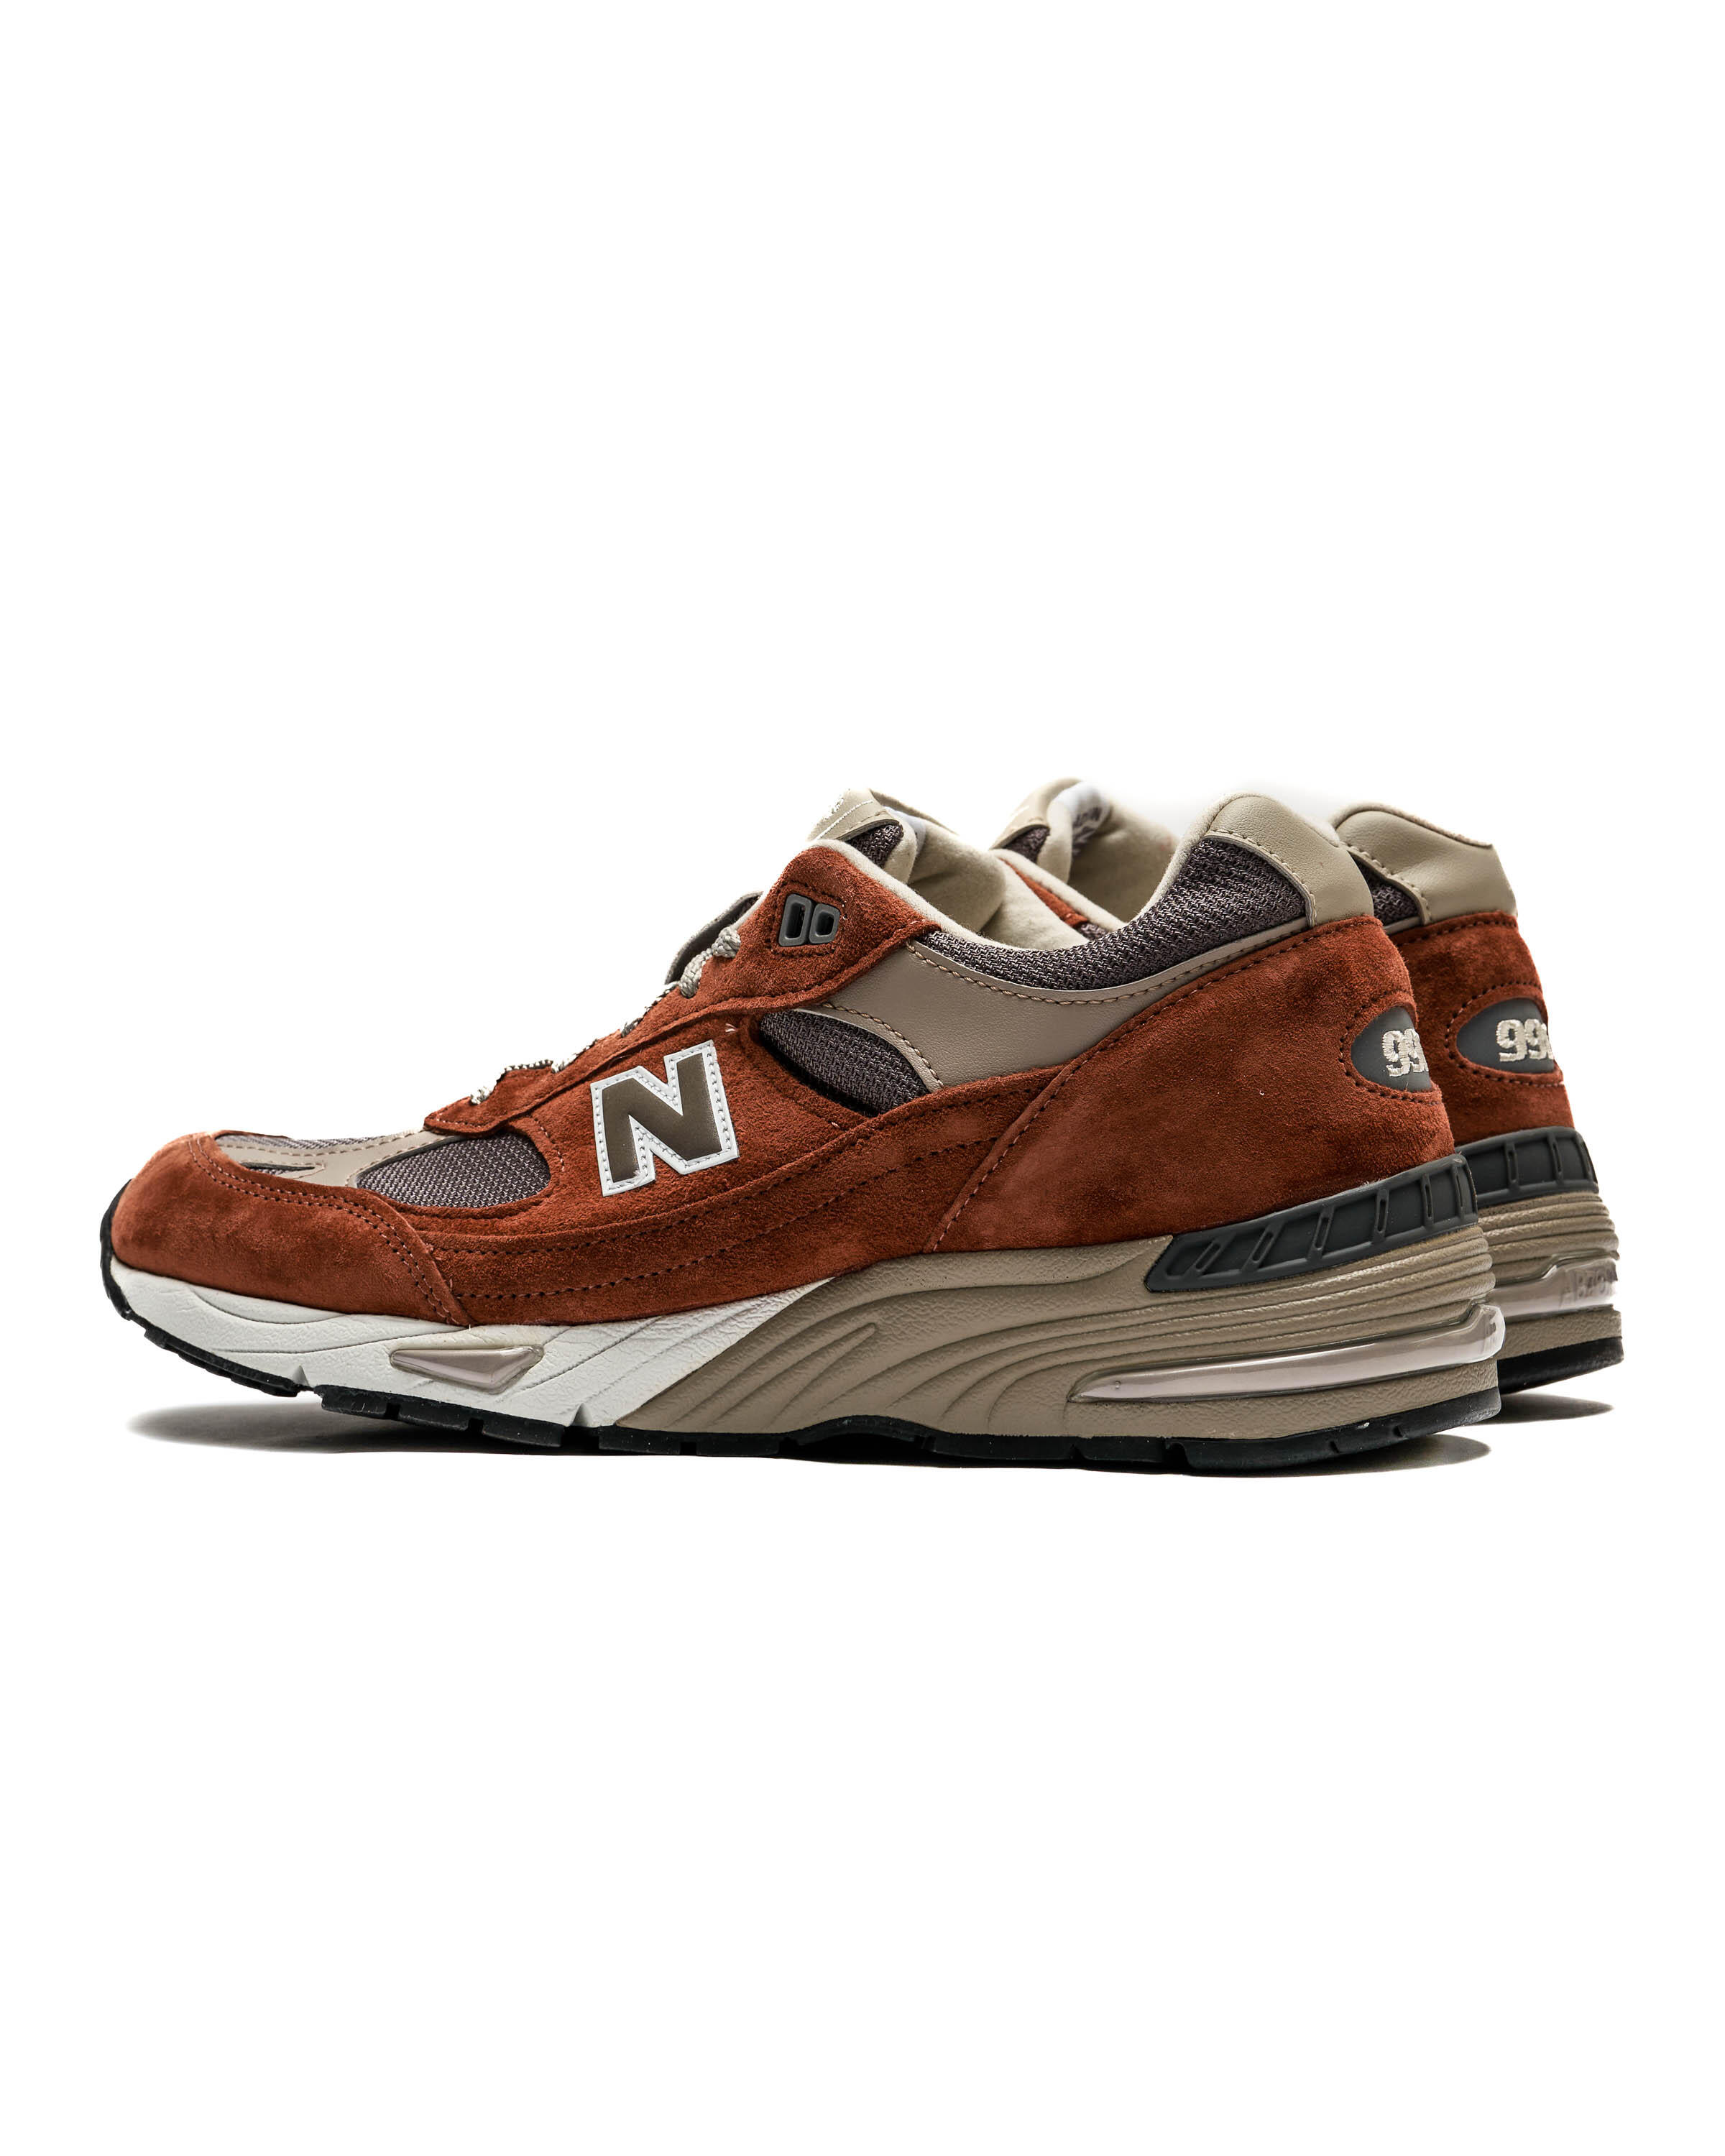 New Balance M 991 PTY - Made in England